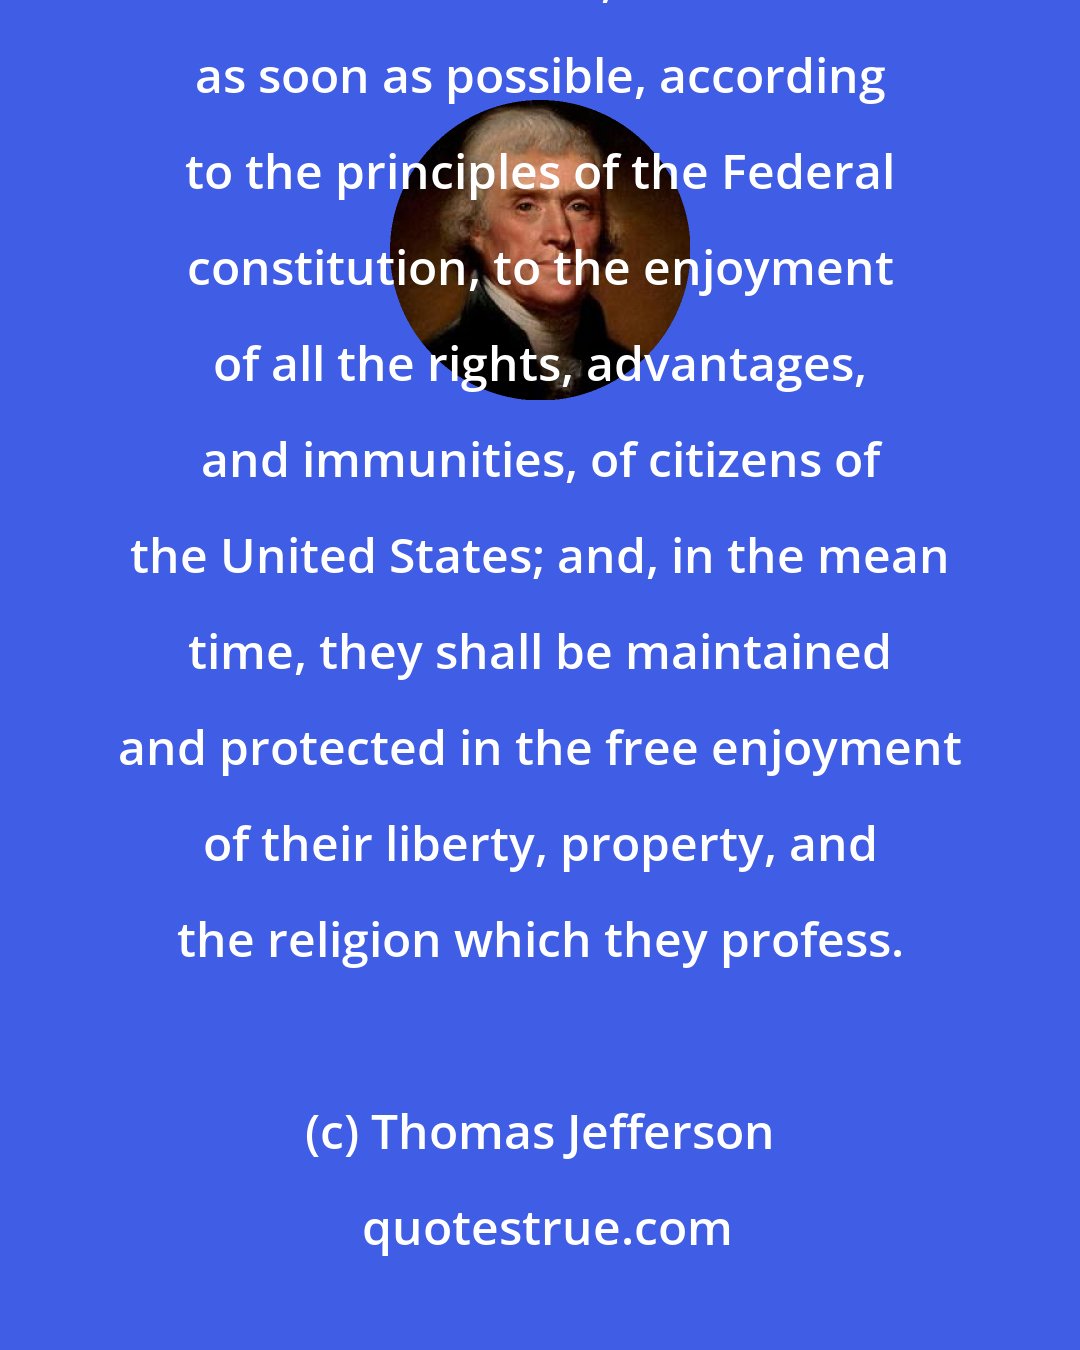 Thomas Jefferson: The inhabitants of the ceded territory shall be incorporated in the Union of the United States, and admitted as soon as possible, according to the principles of the Federal constitution, to the enjoyment of all the rights, advantages, and immunities, of citizens of the United States; and, in the mean time, they shall be maintained and protected in the free enjoyment of their liberty, property, and the religion which they profess.